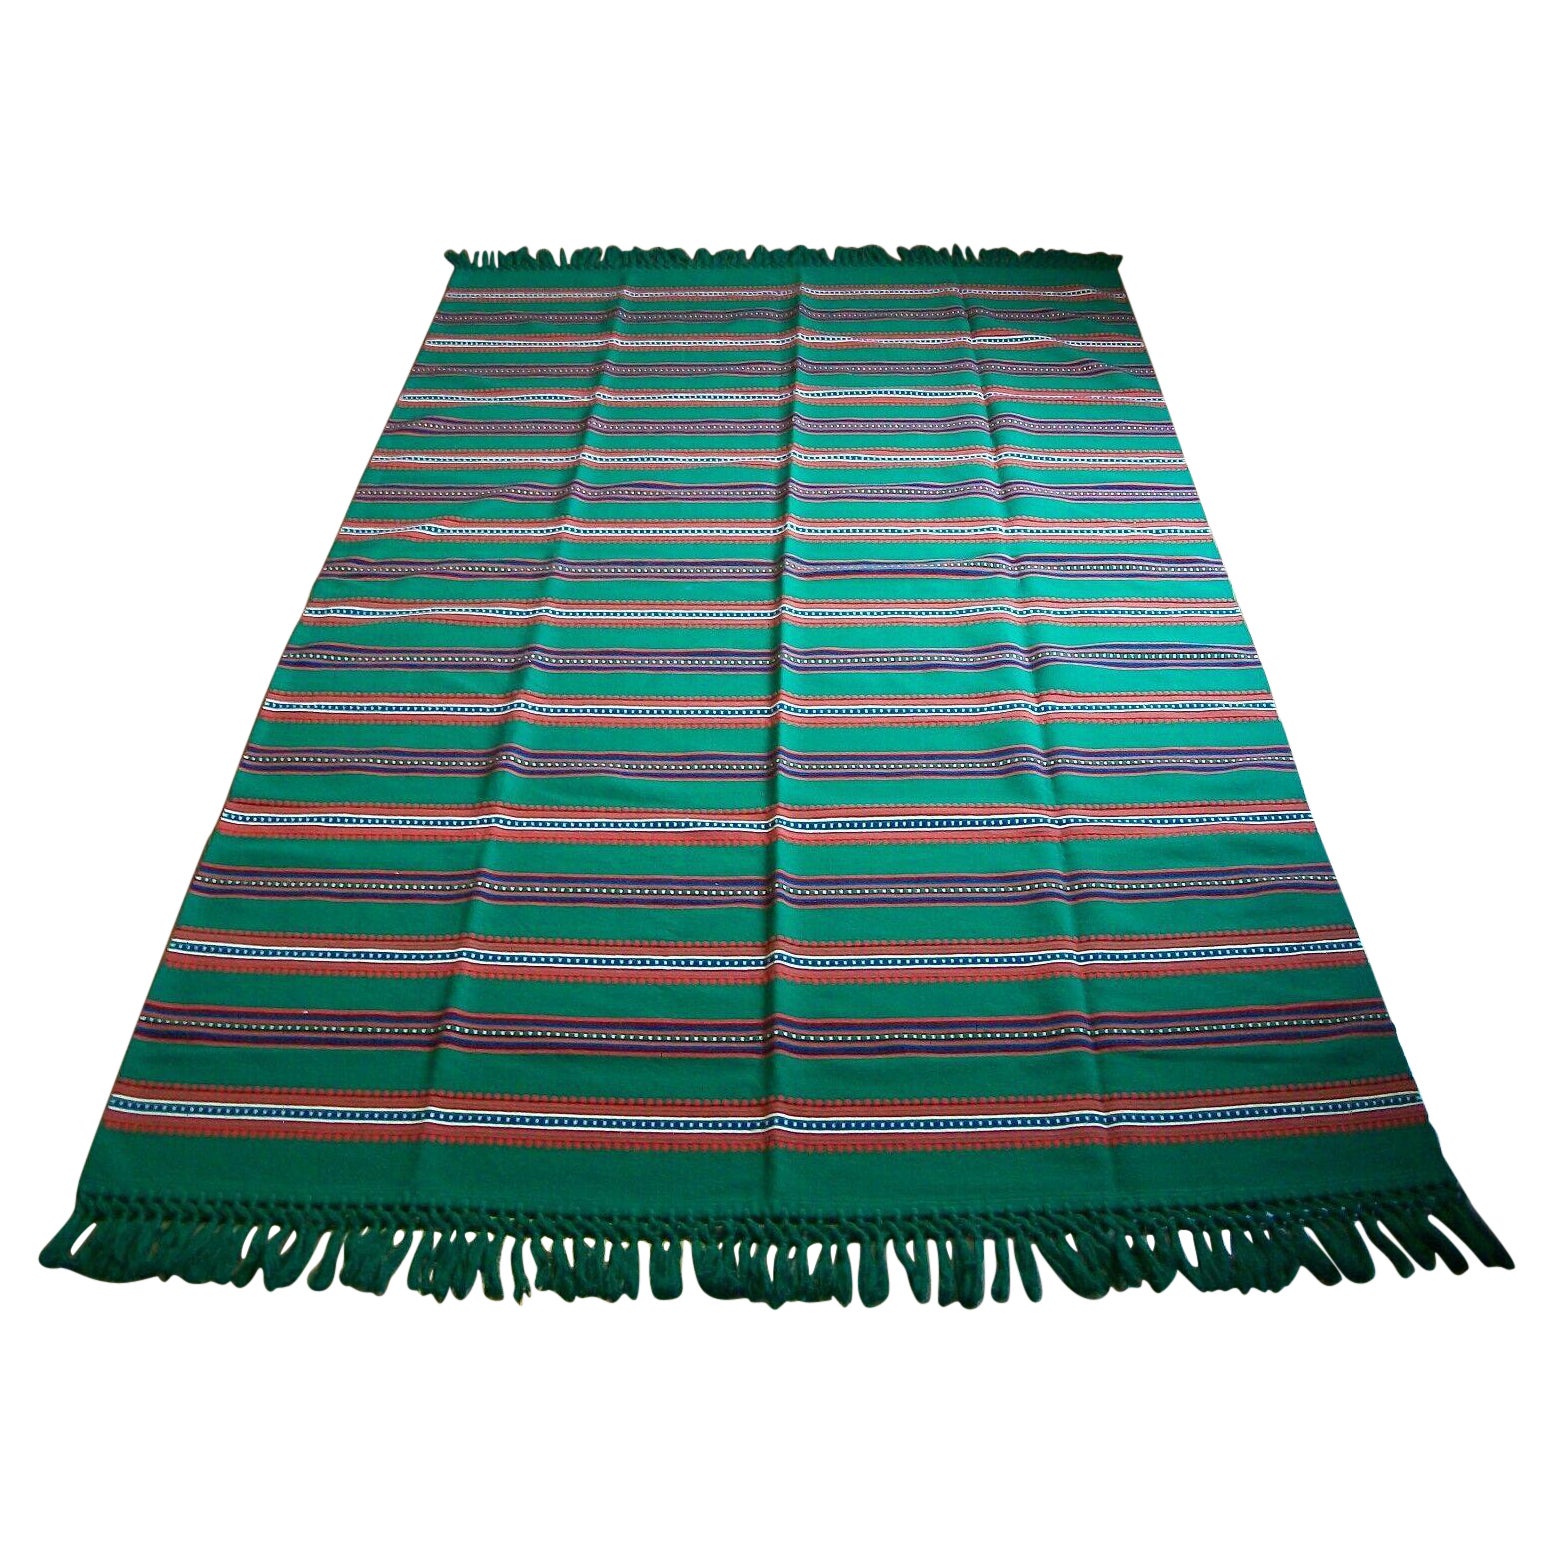 Vintage Embroidered Wool Serape Blanket or Rug, Mexico, C.1970's For Sale